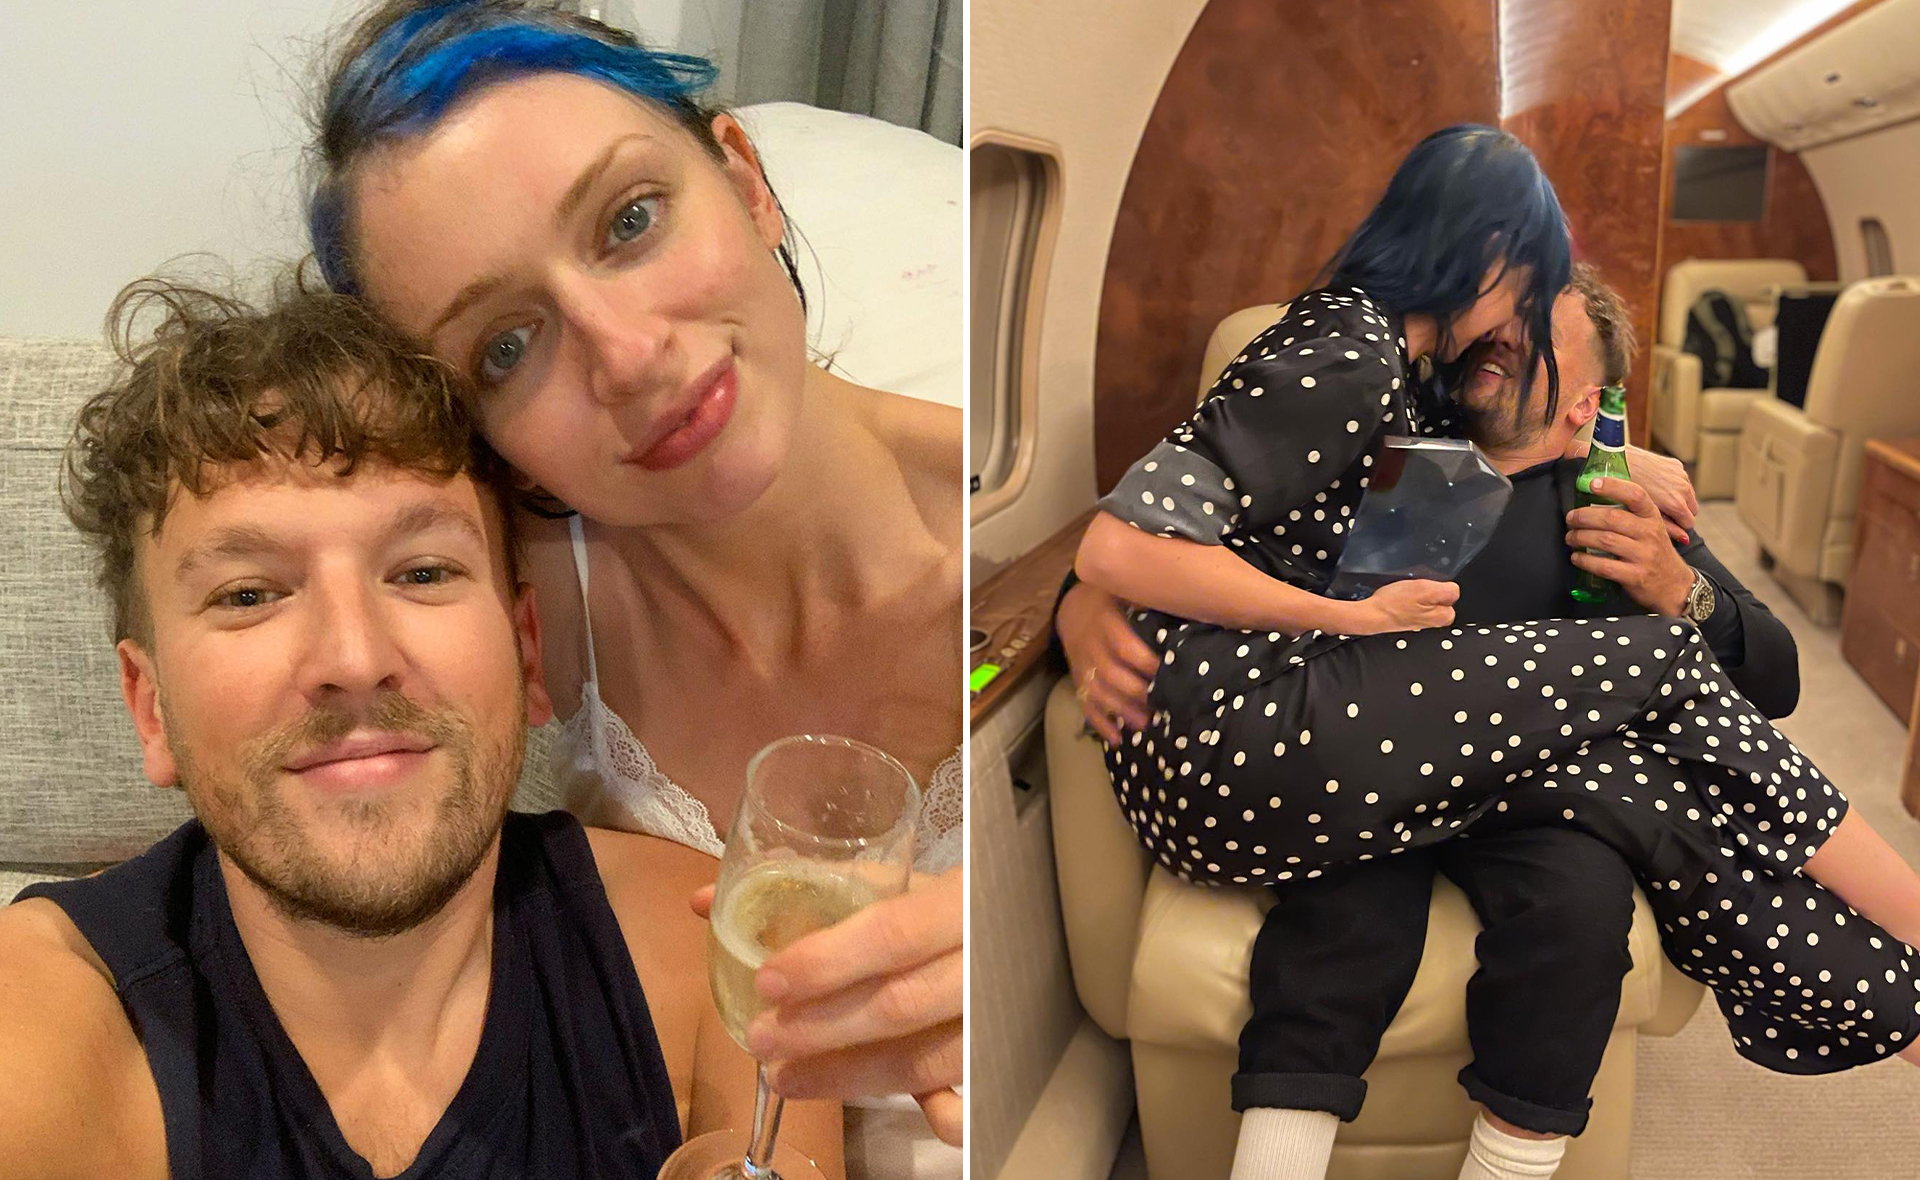 EXCLUSIVE: Dylan Alcott and girlfriend Chantelle Otten’s plans for marriage and kids